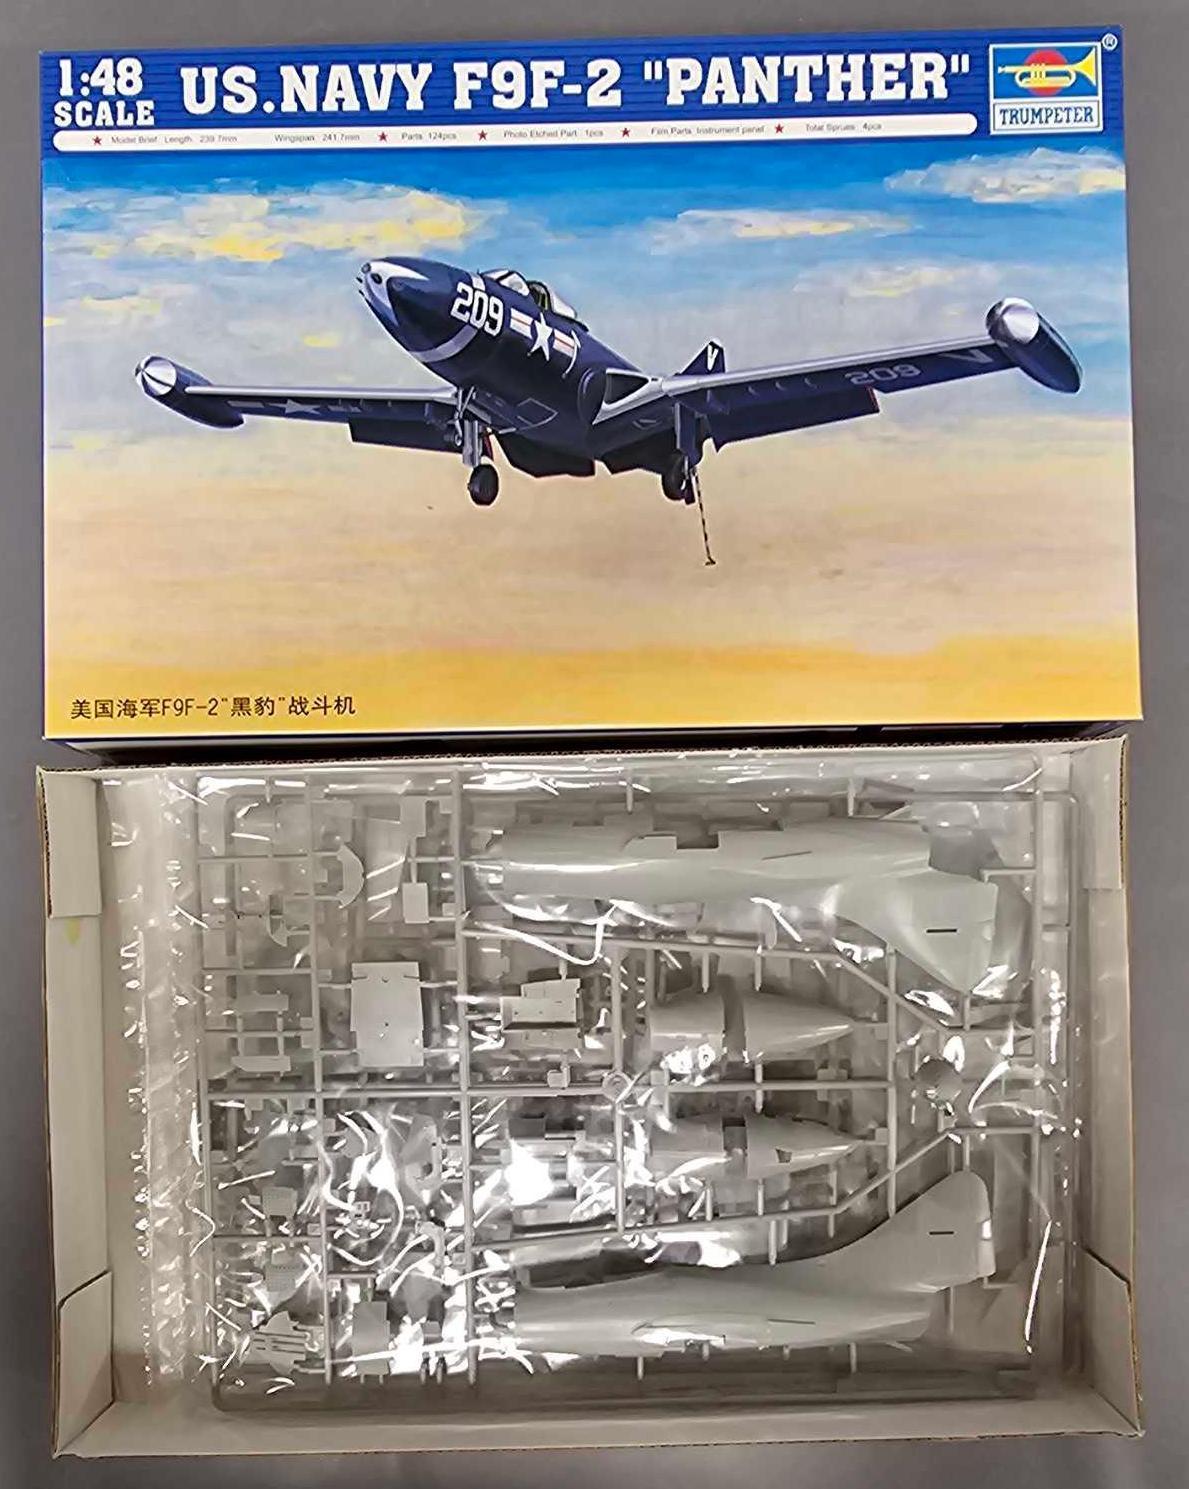 Trumpeter 1:48 US Navy F9F-2 Panther kit 02832